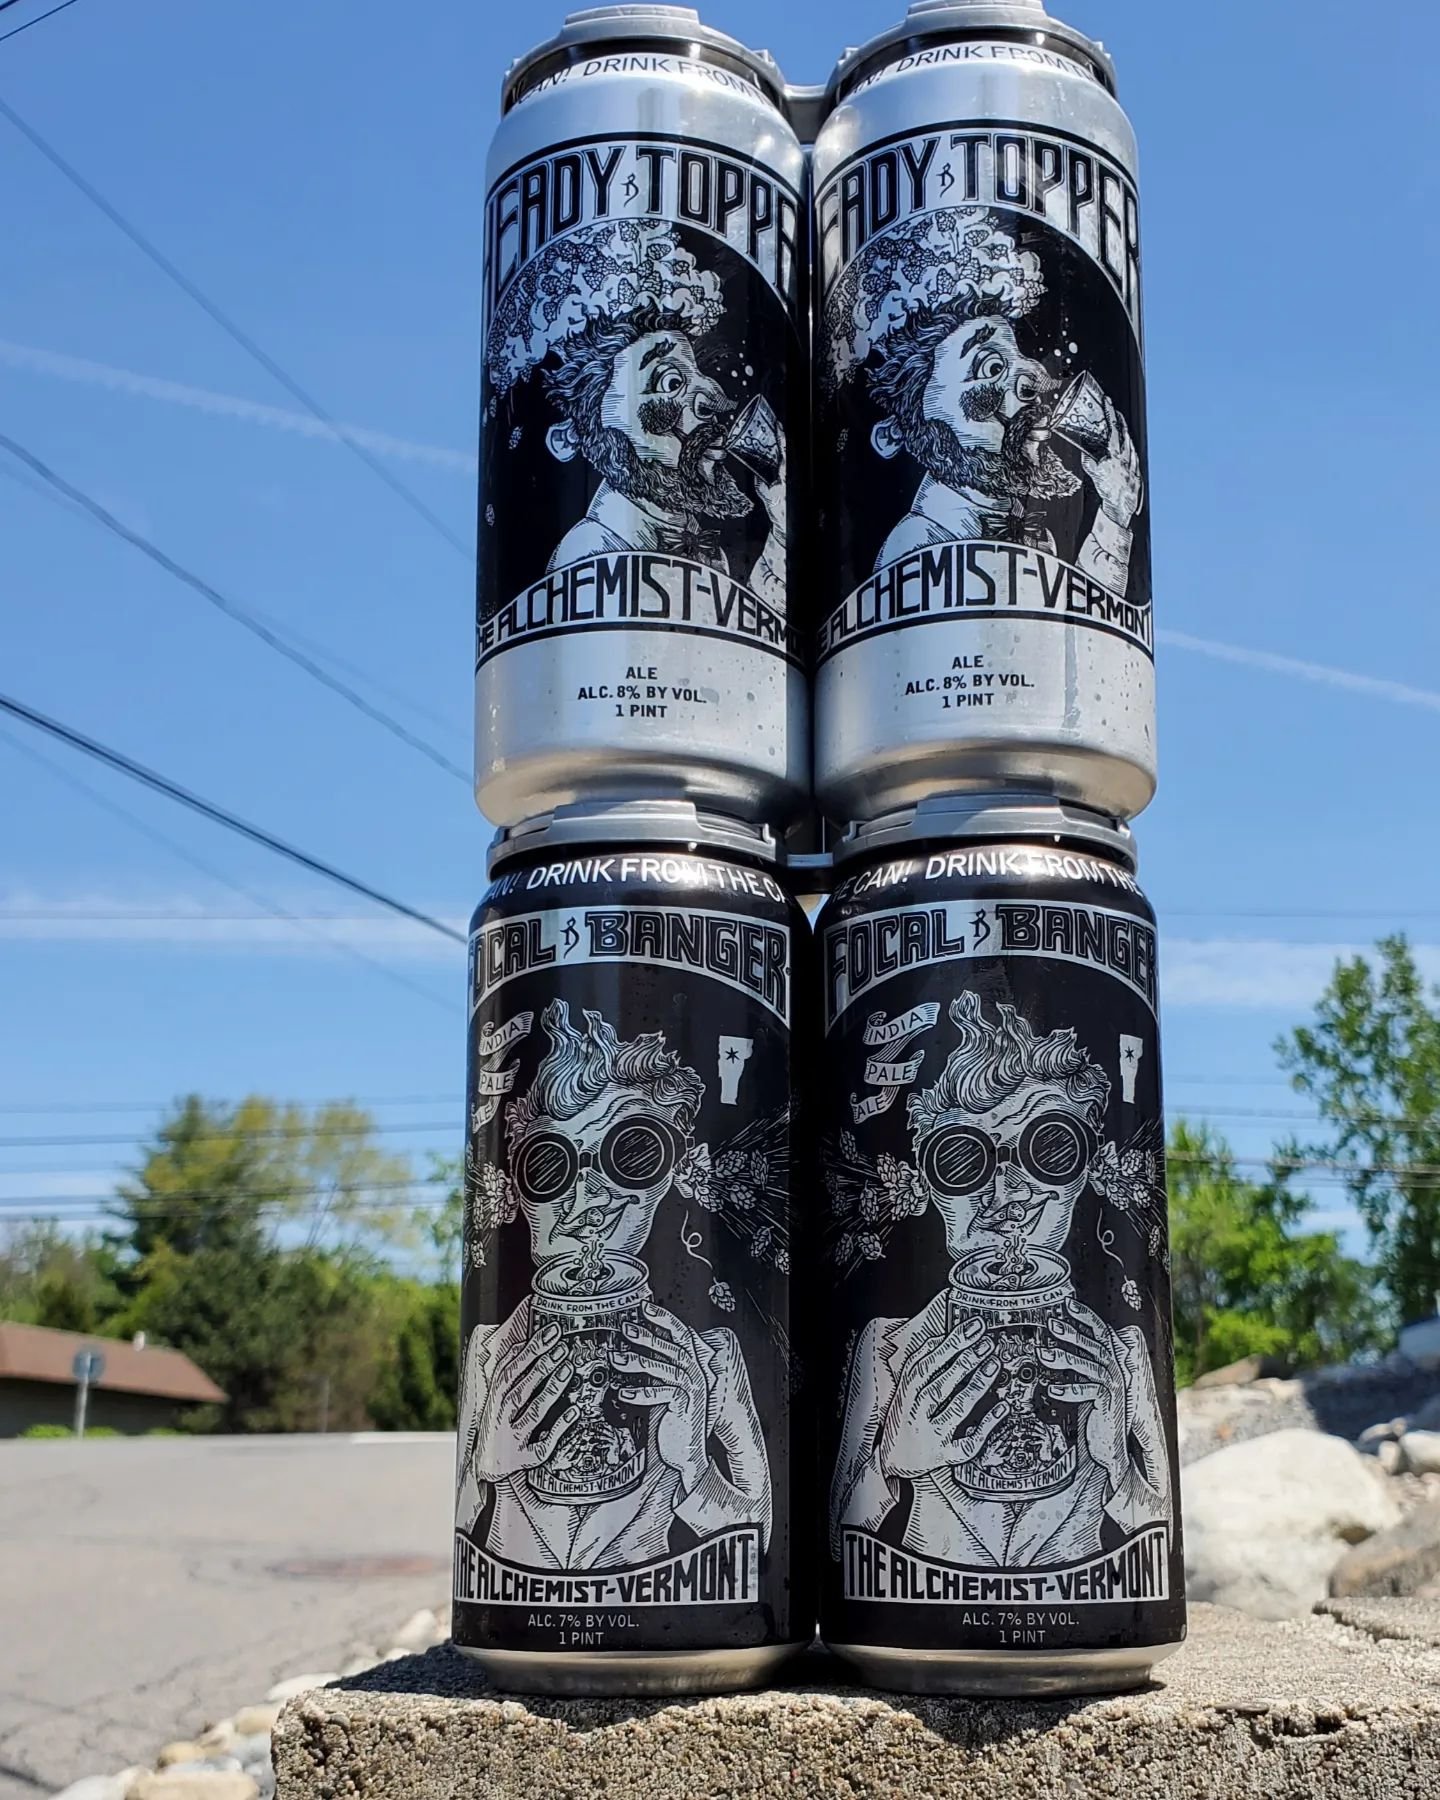 Alchemist time! Little drop of Heady and Focal, first come first served. 🍻

#thealchemist #headytopper #focalbanger